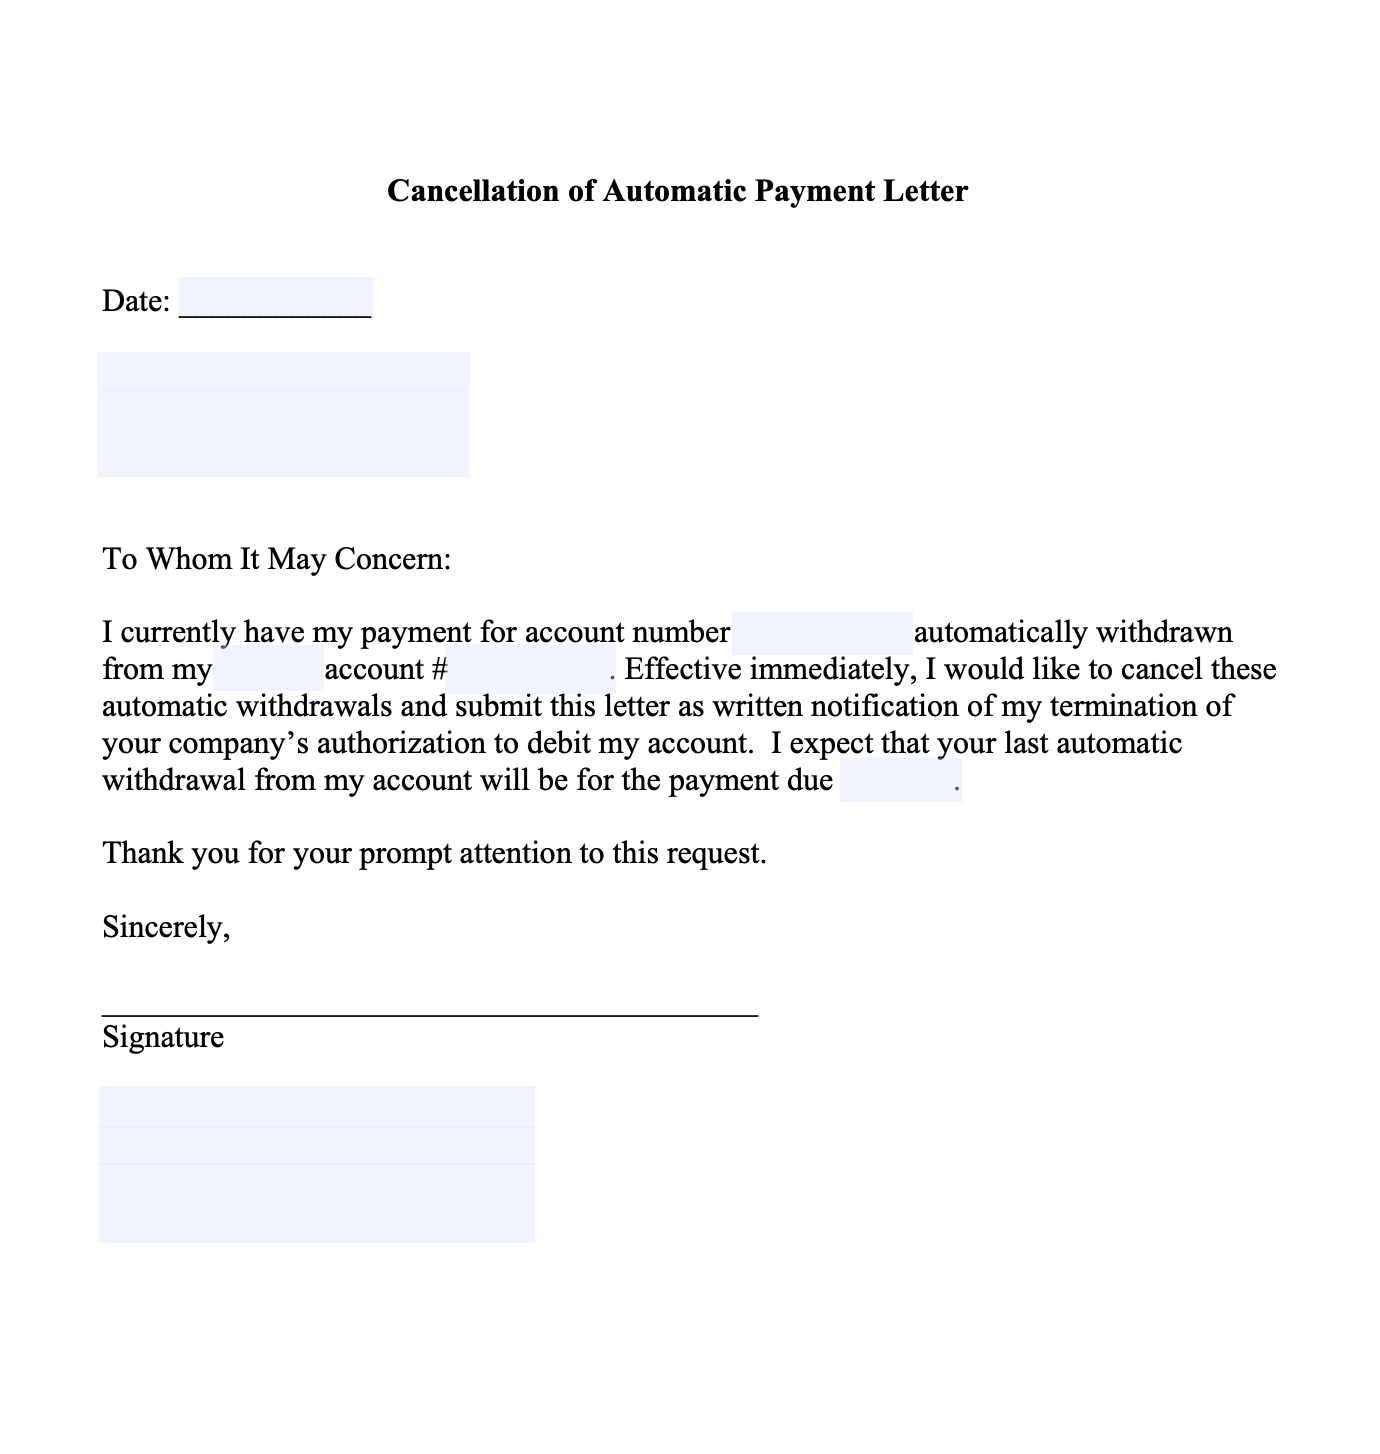 insurance cancellation of automatic payment letter